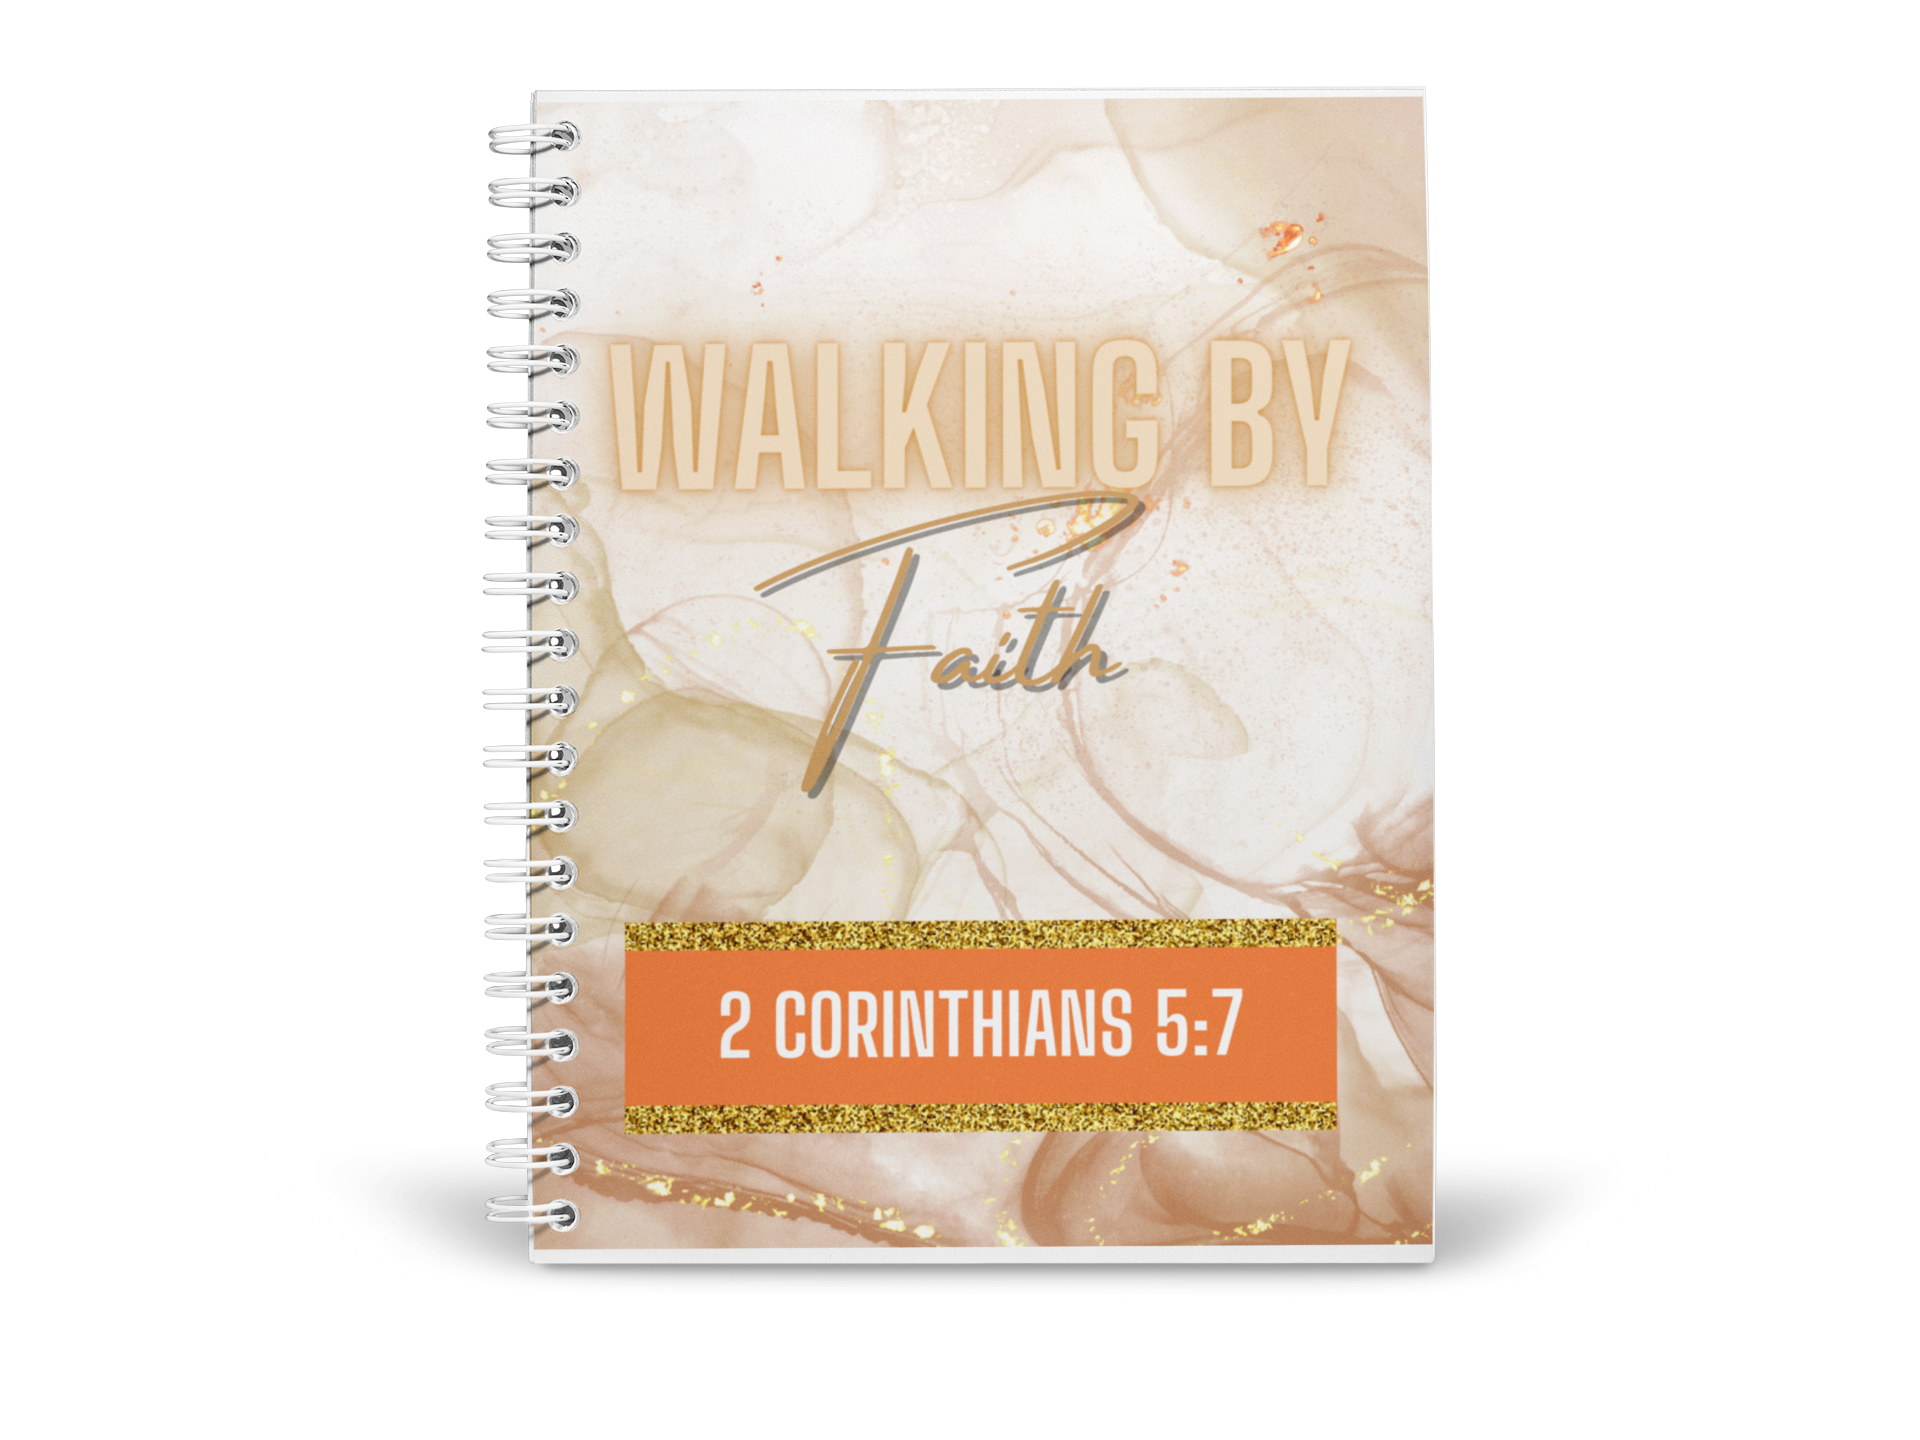 FAITHFUL REFLECTIONS JOURNALS/NOTEBOOKSIntroducing our Faithful Reflections Journal - a beautifully crafted notebook designed to enrich your spiritual journey. With 200 lined sheets, it provides ample spaNOTEBOOK/JOURNALCreatively JoyCreatively Joy, LLCAFFIRMATION NOTEBOOK